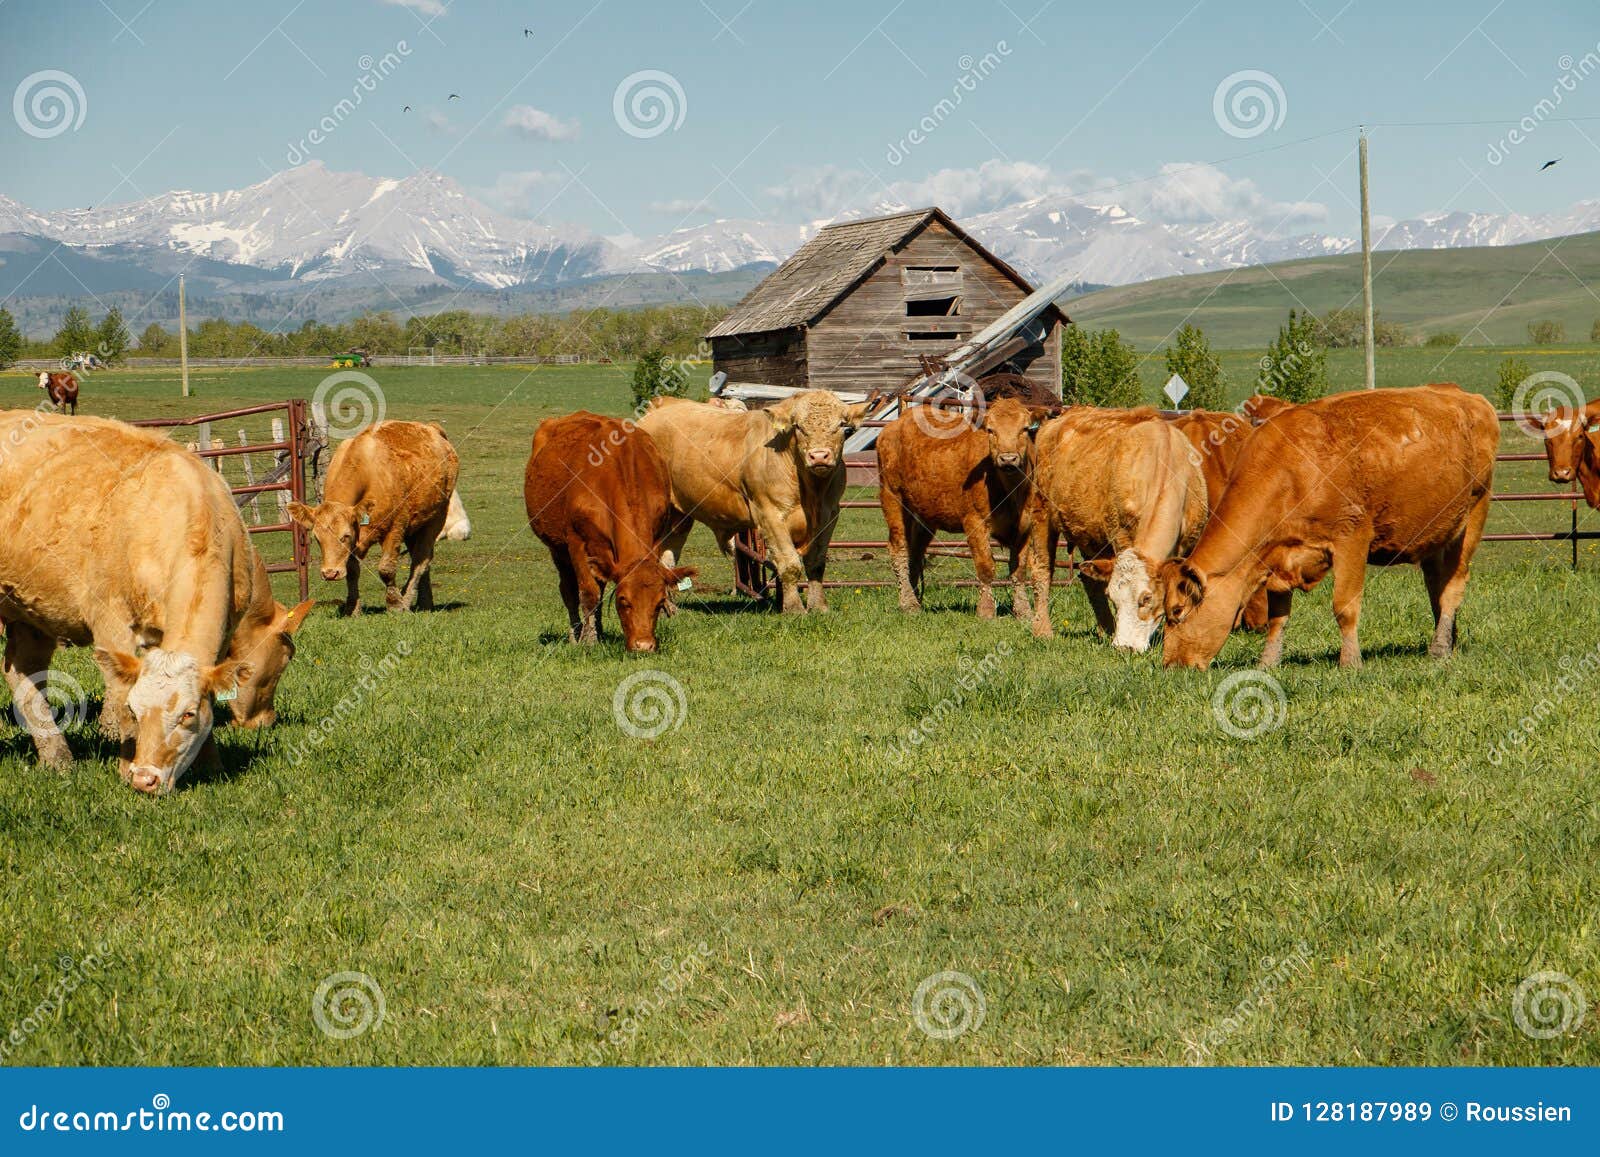 cows herd in happy summer time in south alberta, canada